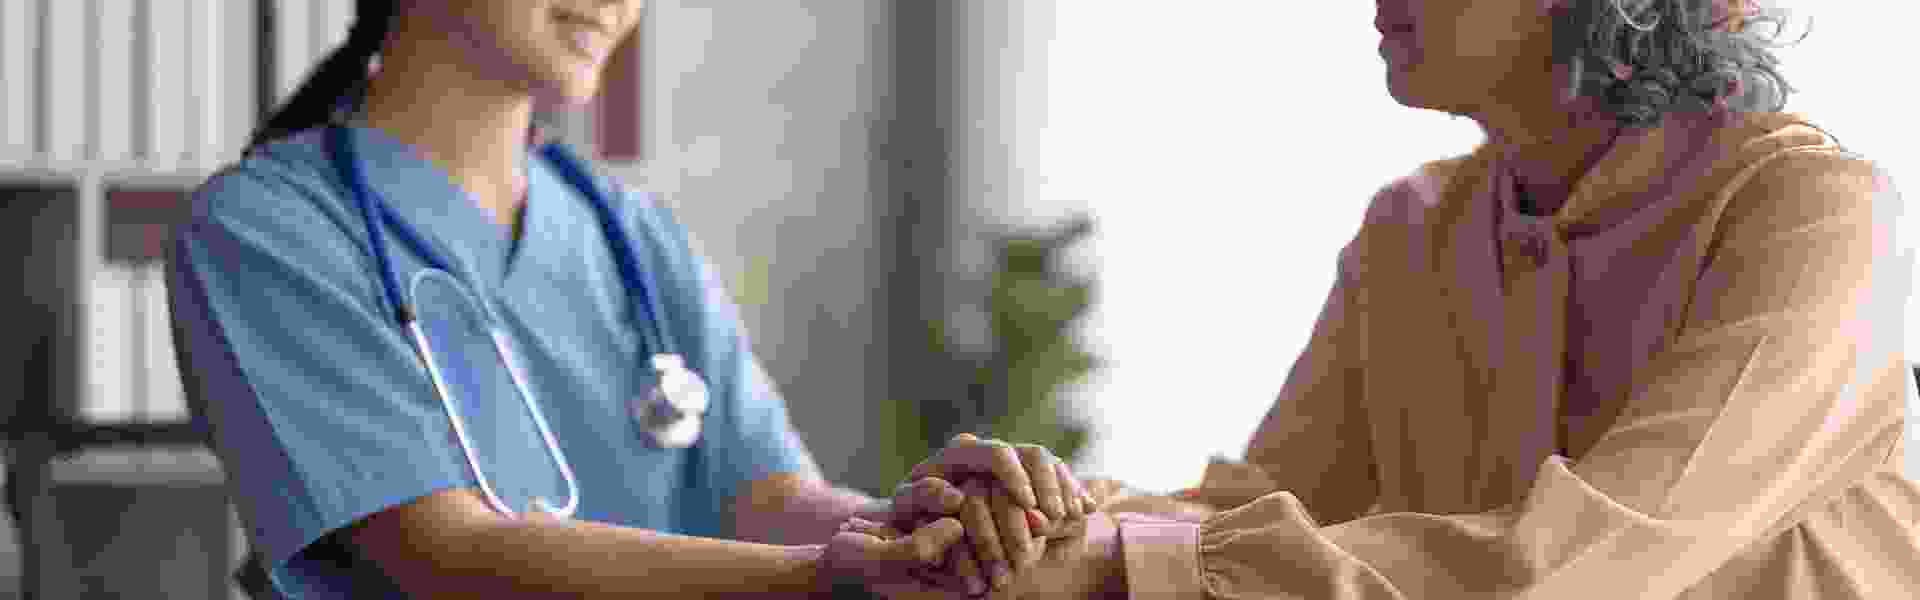 doctor holding a patient's hands